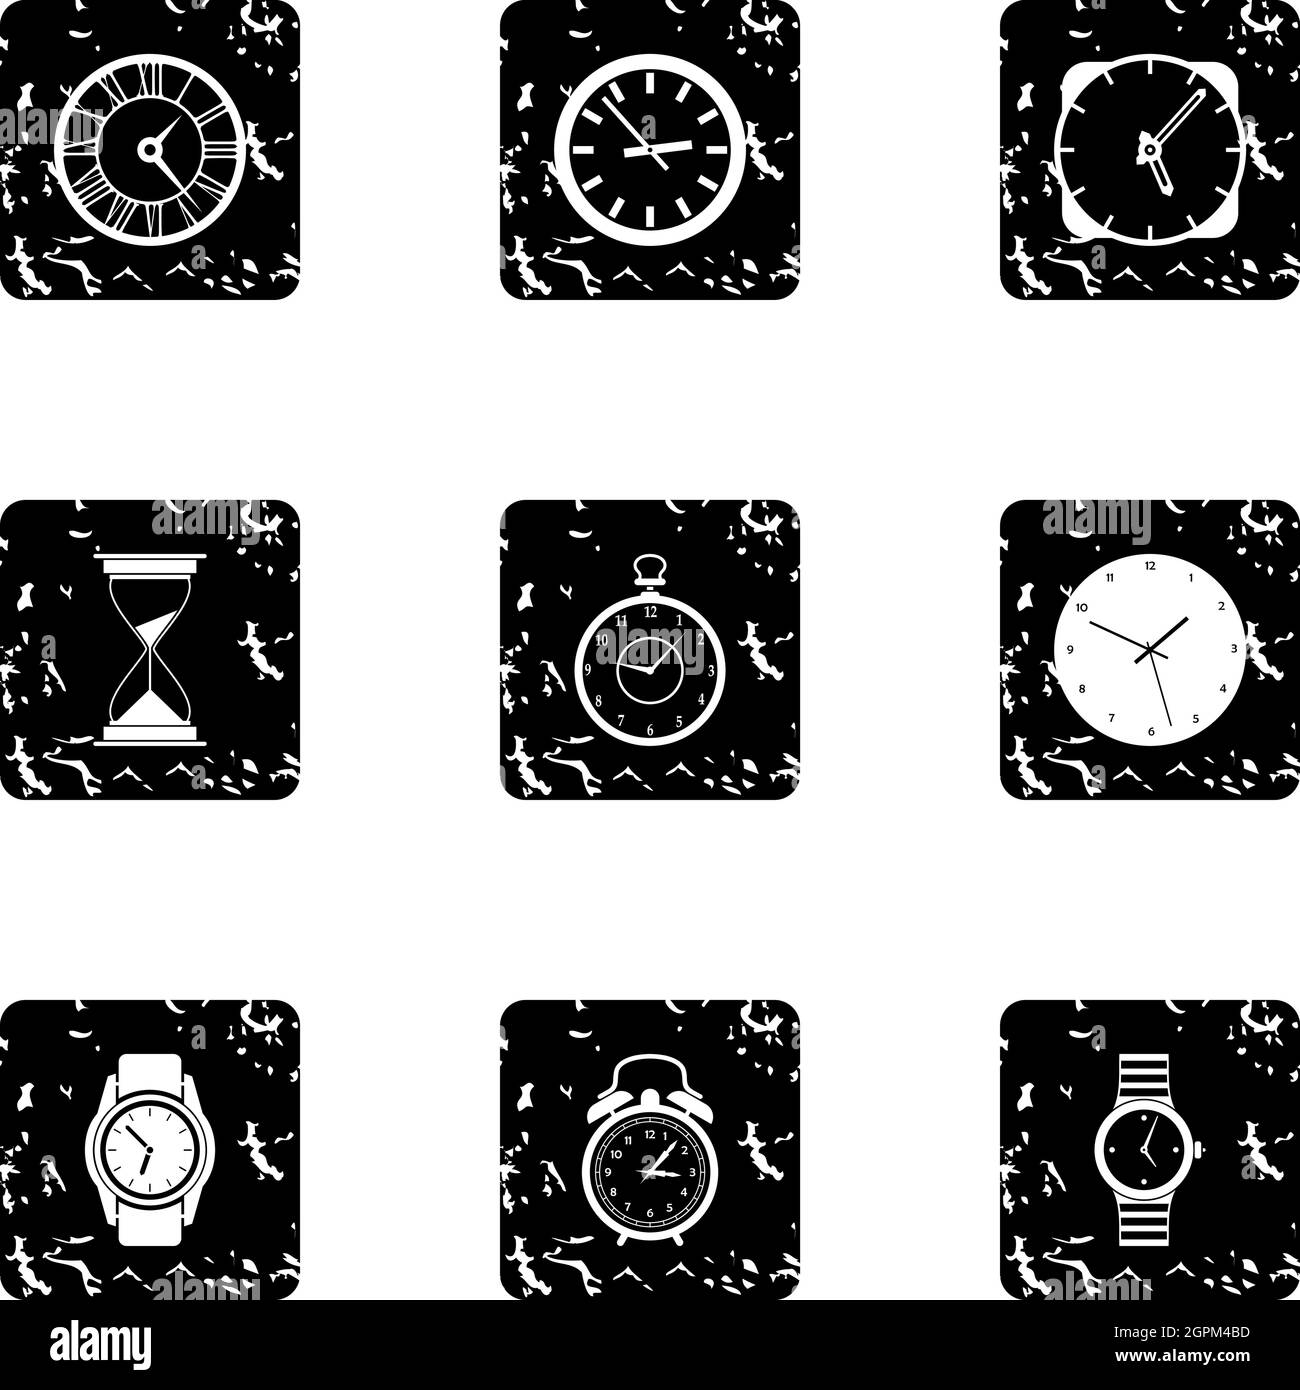 Kinds of watches icons set, grunge style Stock Vector